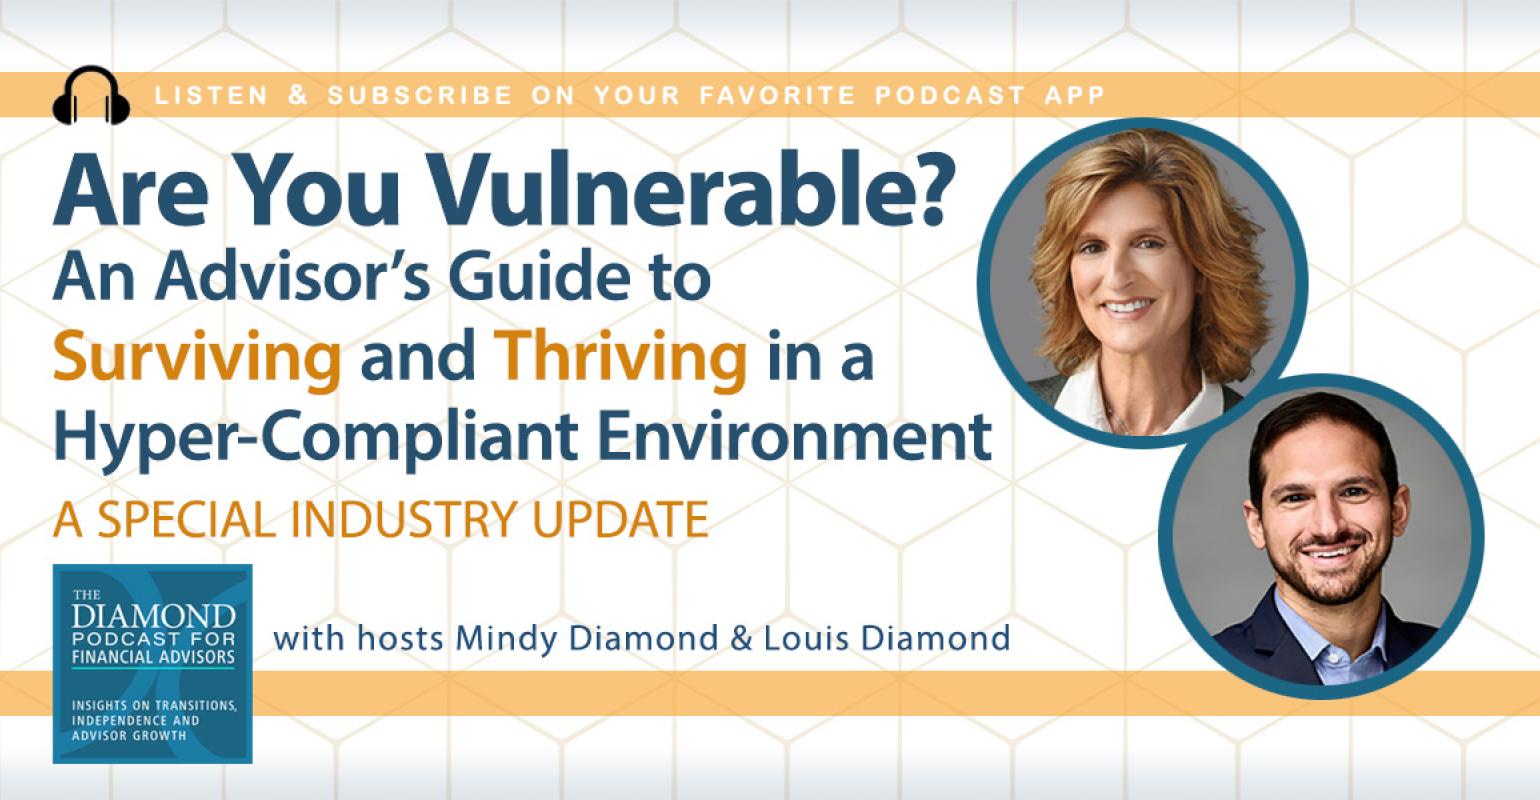 Diamond Podcast for Financial Advisors Industry Update compliance